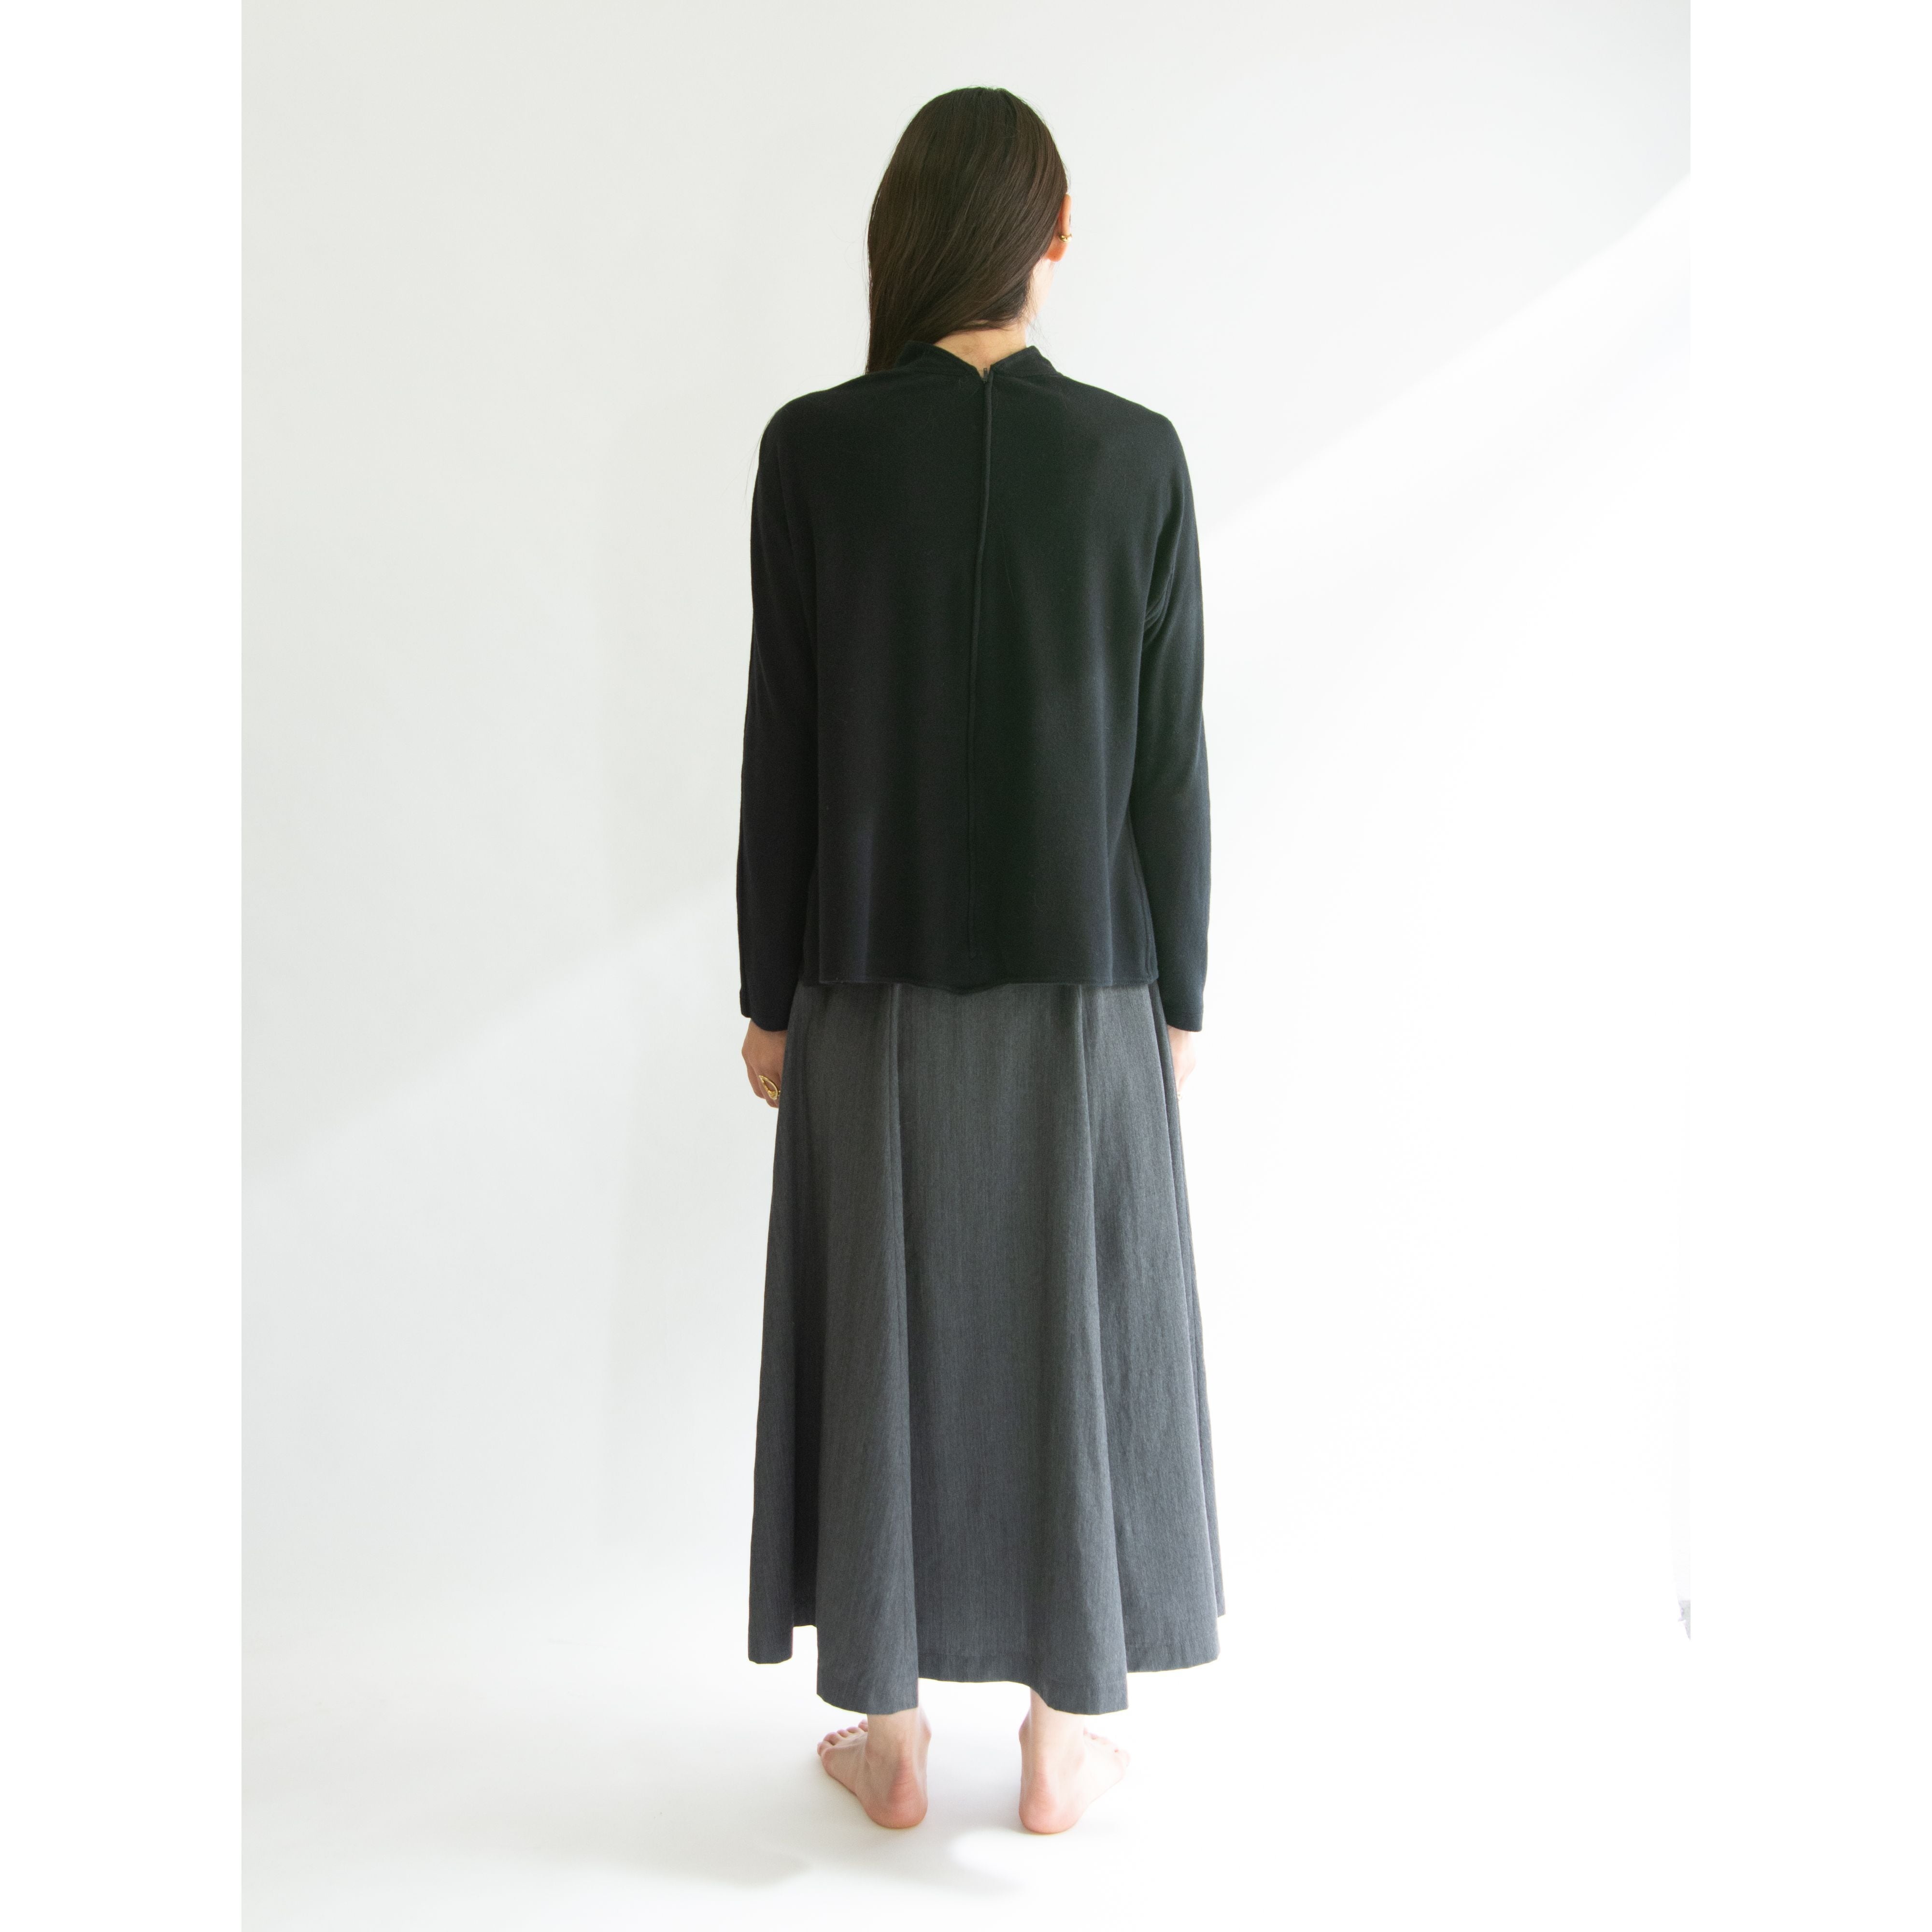 【tricot COMME des GARCONS】Made in Japan "AD1988" 100% Wool Flare Skirt （トリコ コムデギャルソン 日本製ウールフレアスカート）